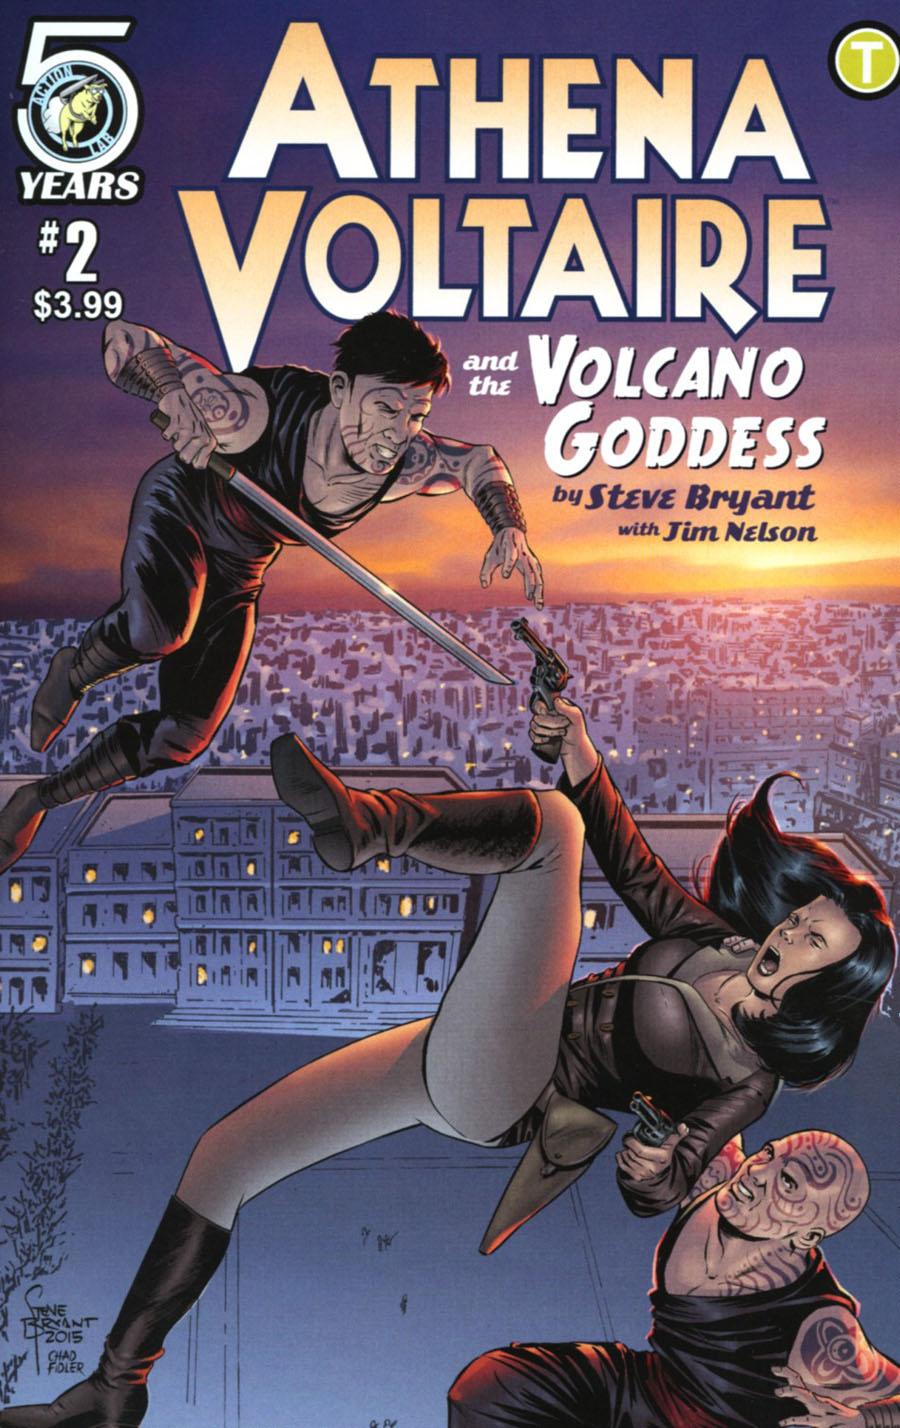 Athena Voltaire And The Volcano Goddess Vol. 1 #2